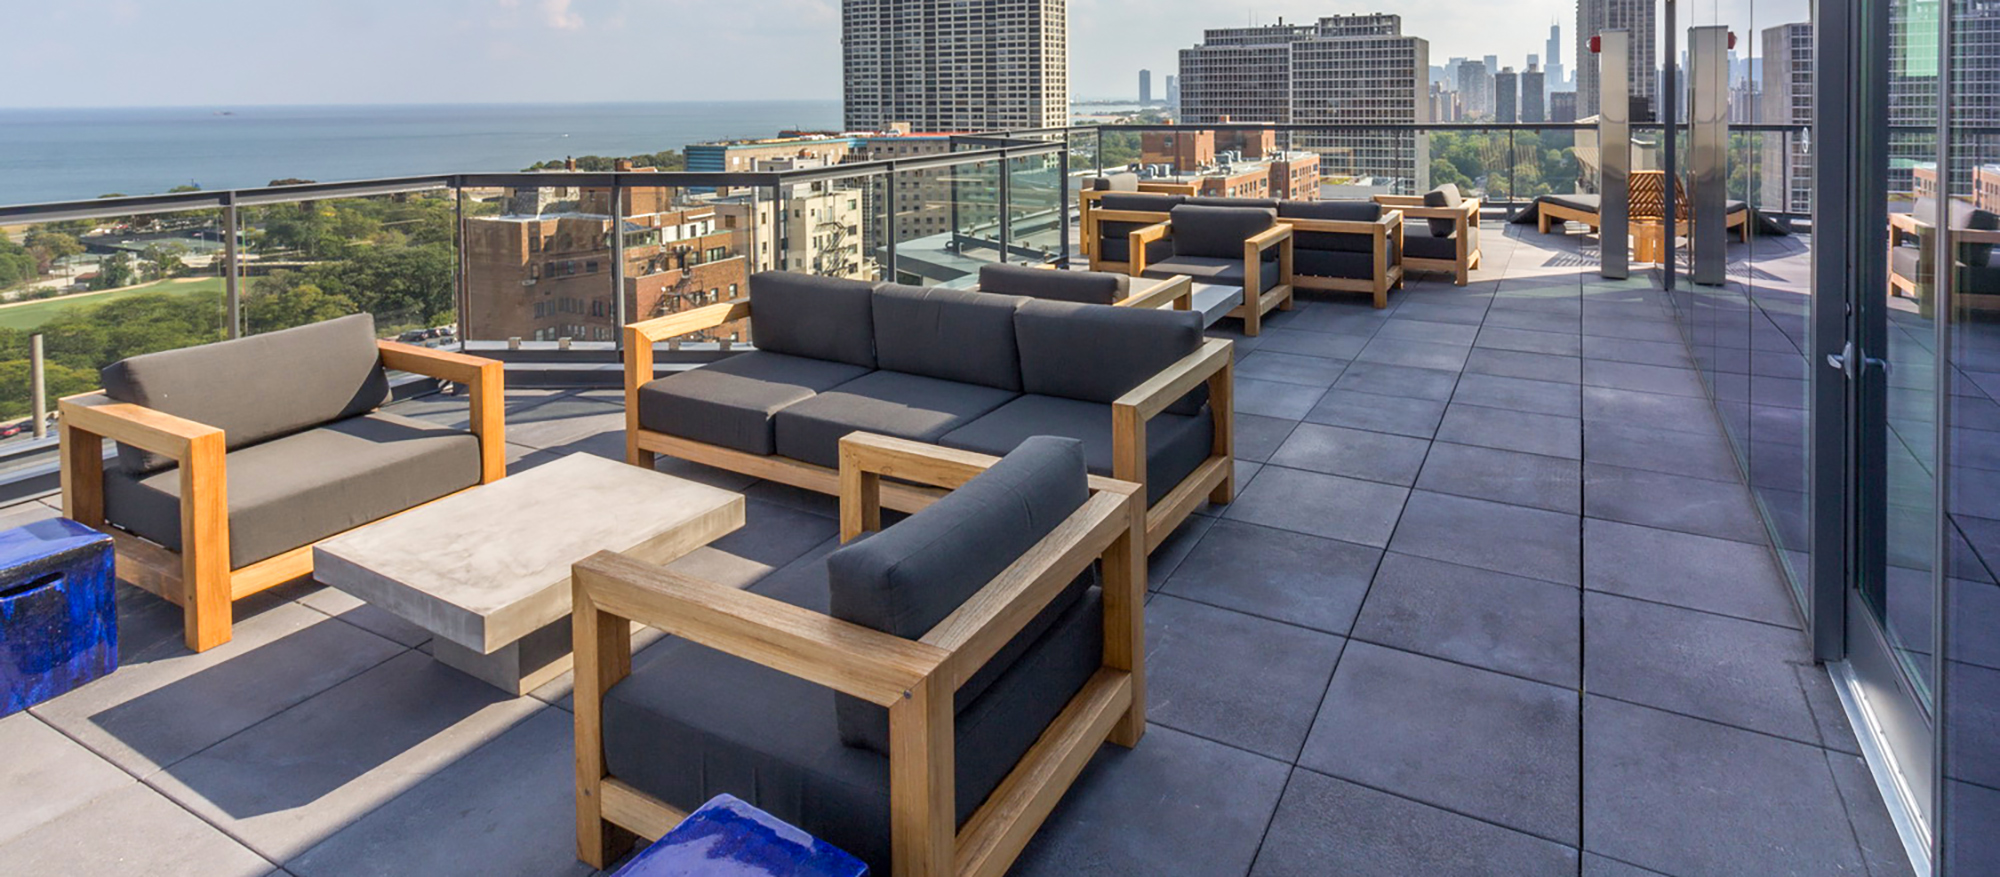 Unilock Umbriano Slabs lay the groundwork for a condominium roof deck with modern patio furniture and a view of the Chicago skyline.